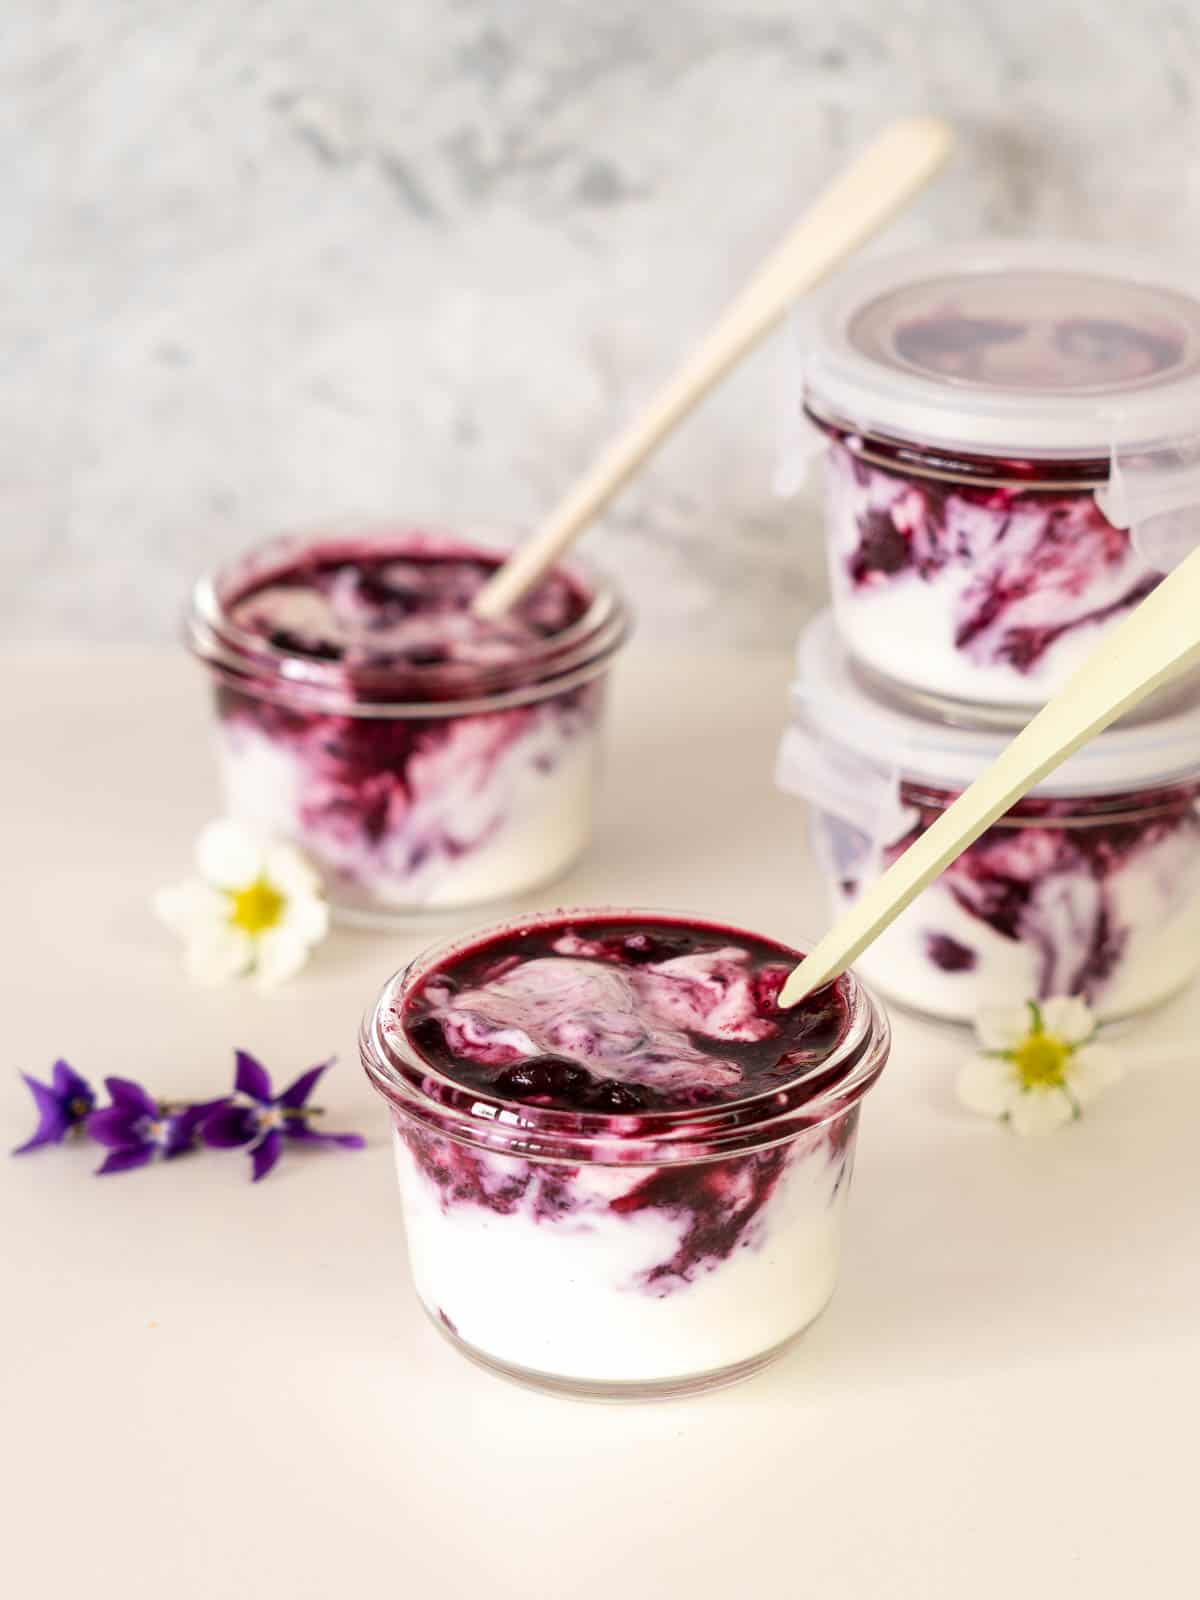 Blueberry yogurt in small glass jars on a bench top scattered with white and purple flowers.